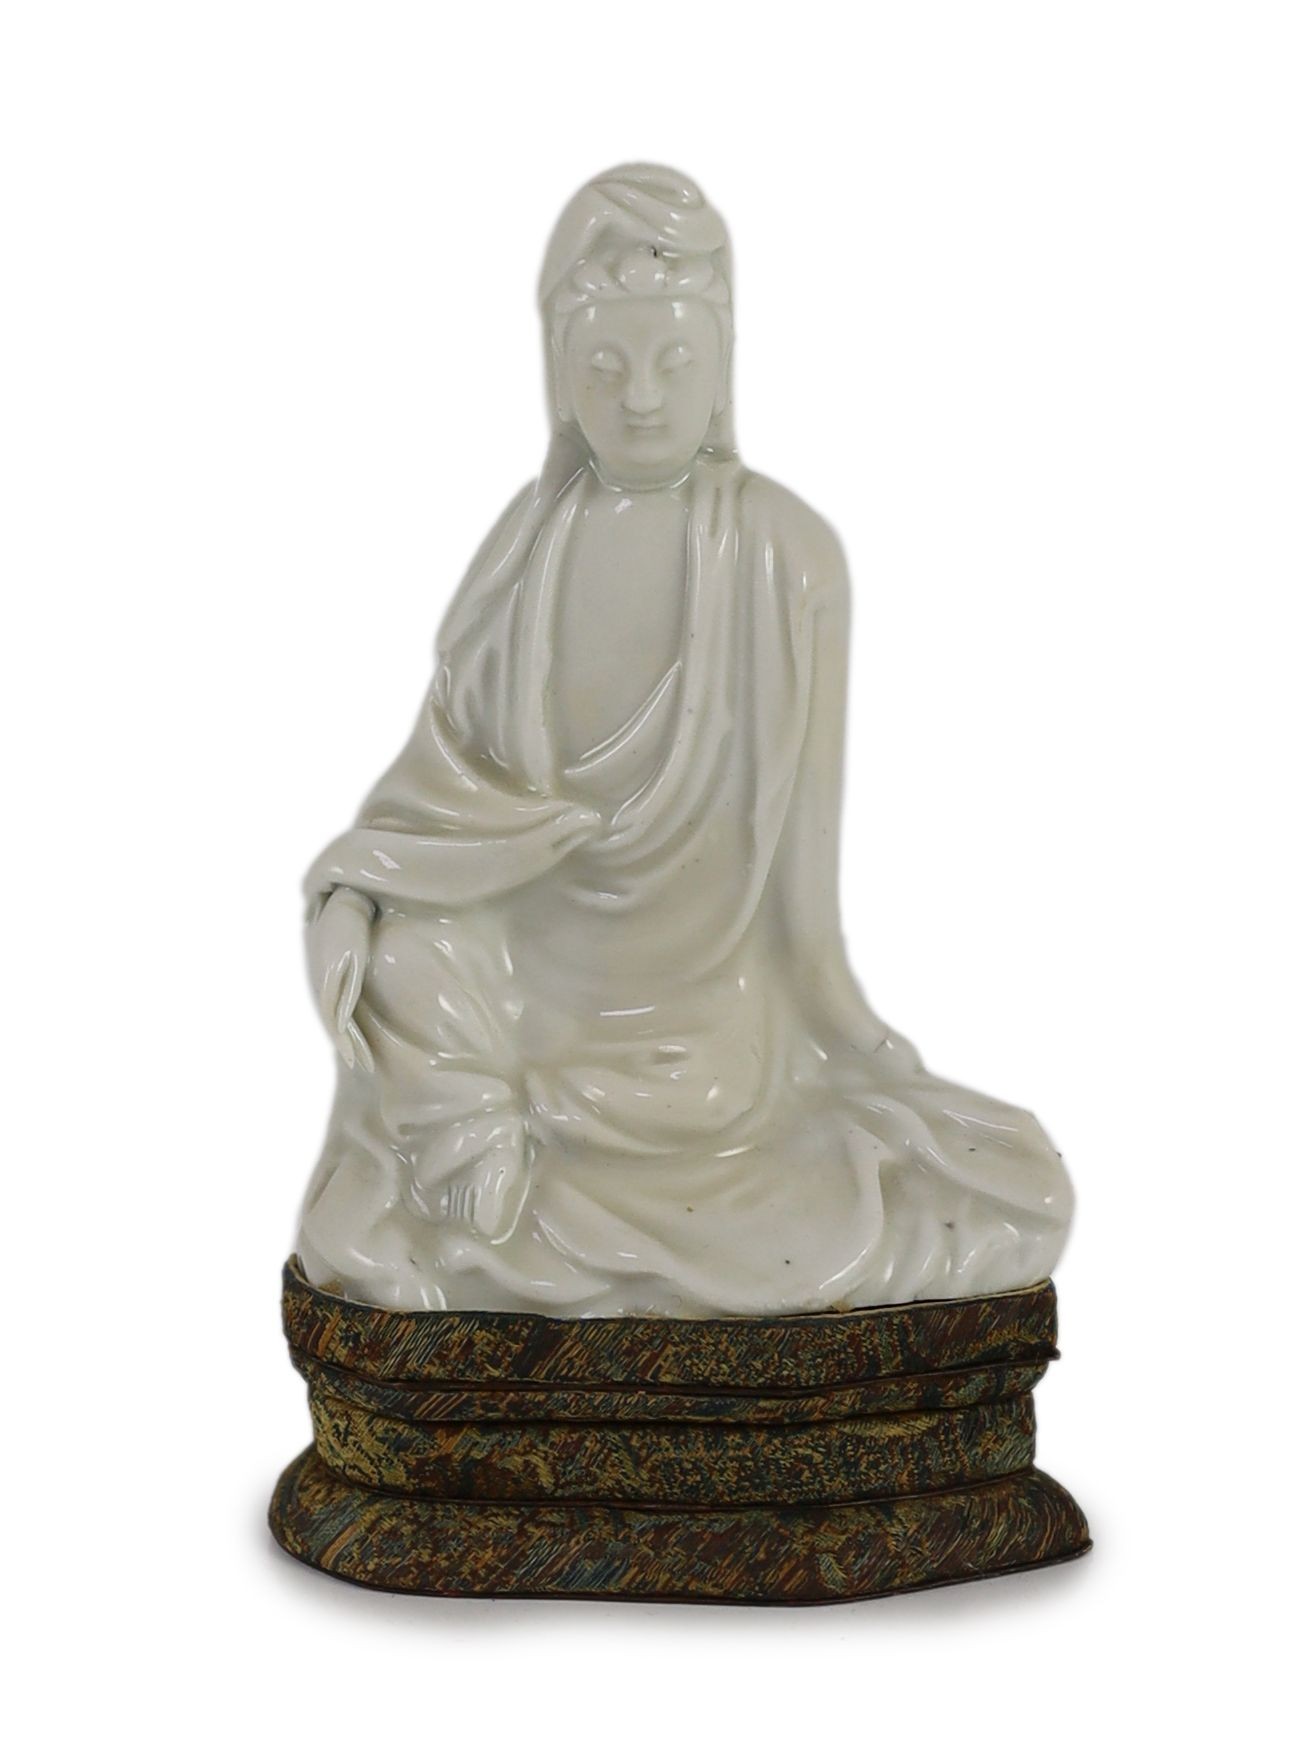 A Chinese blanc-de-chine seated figure of Guanyin, Dehua kilns, 18th century, 12cm high, Brocade covered stand